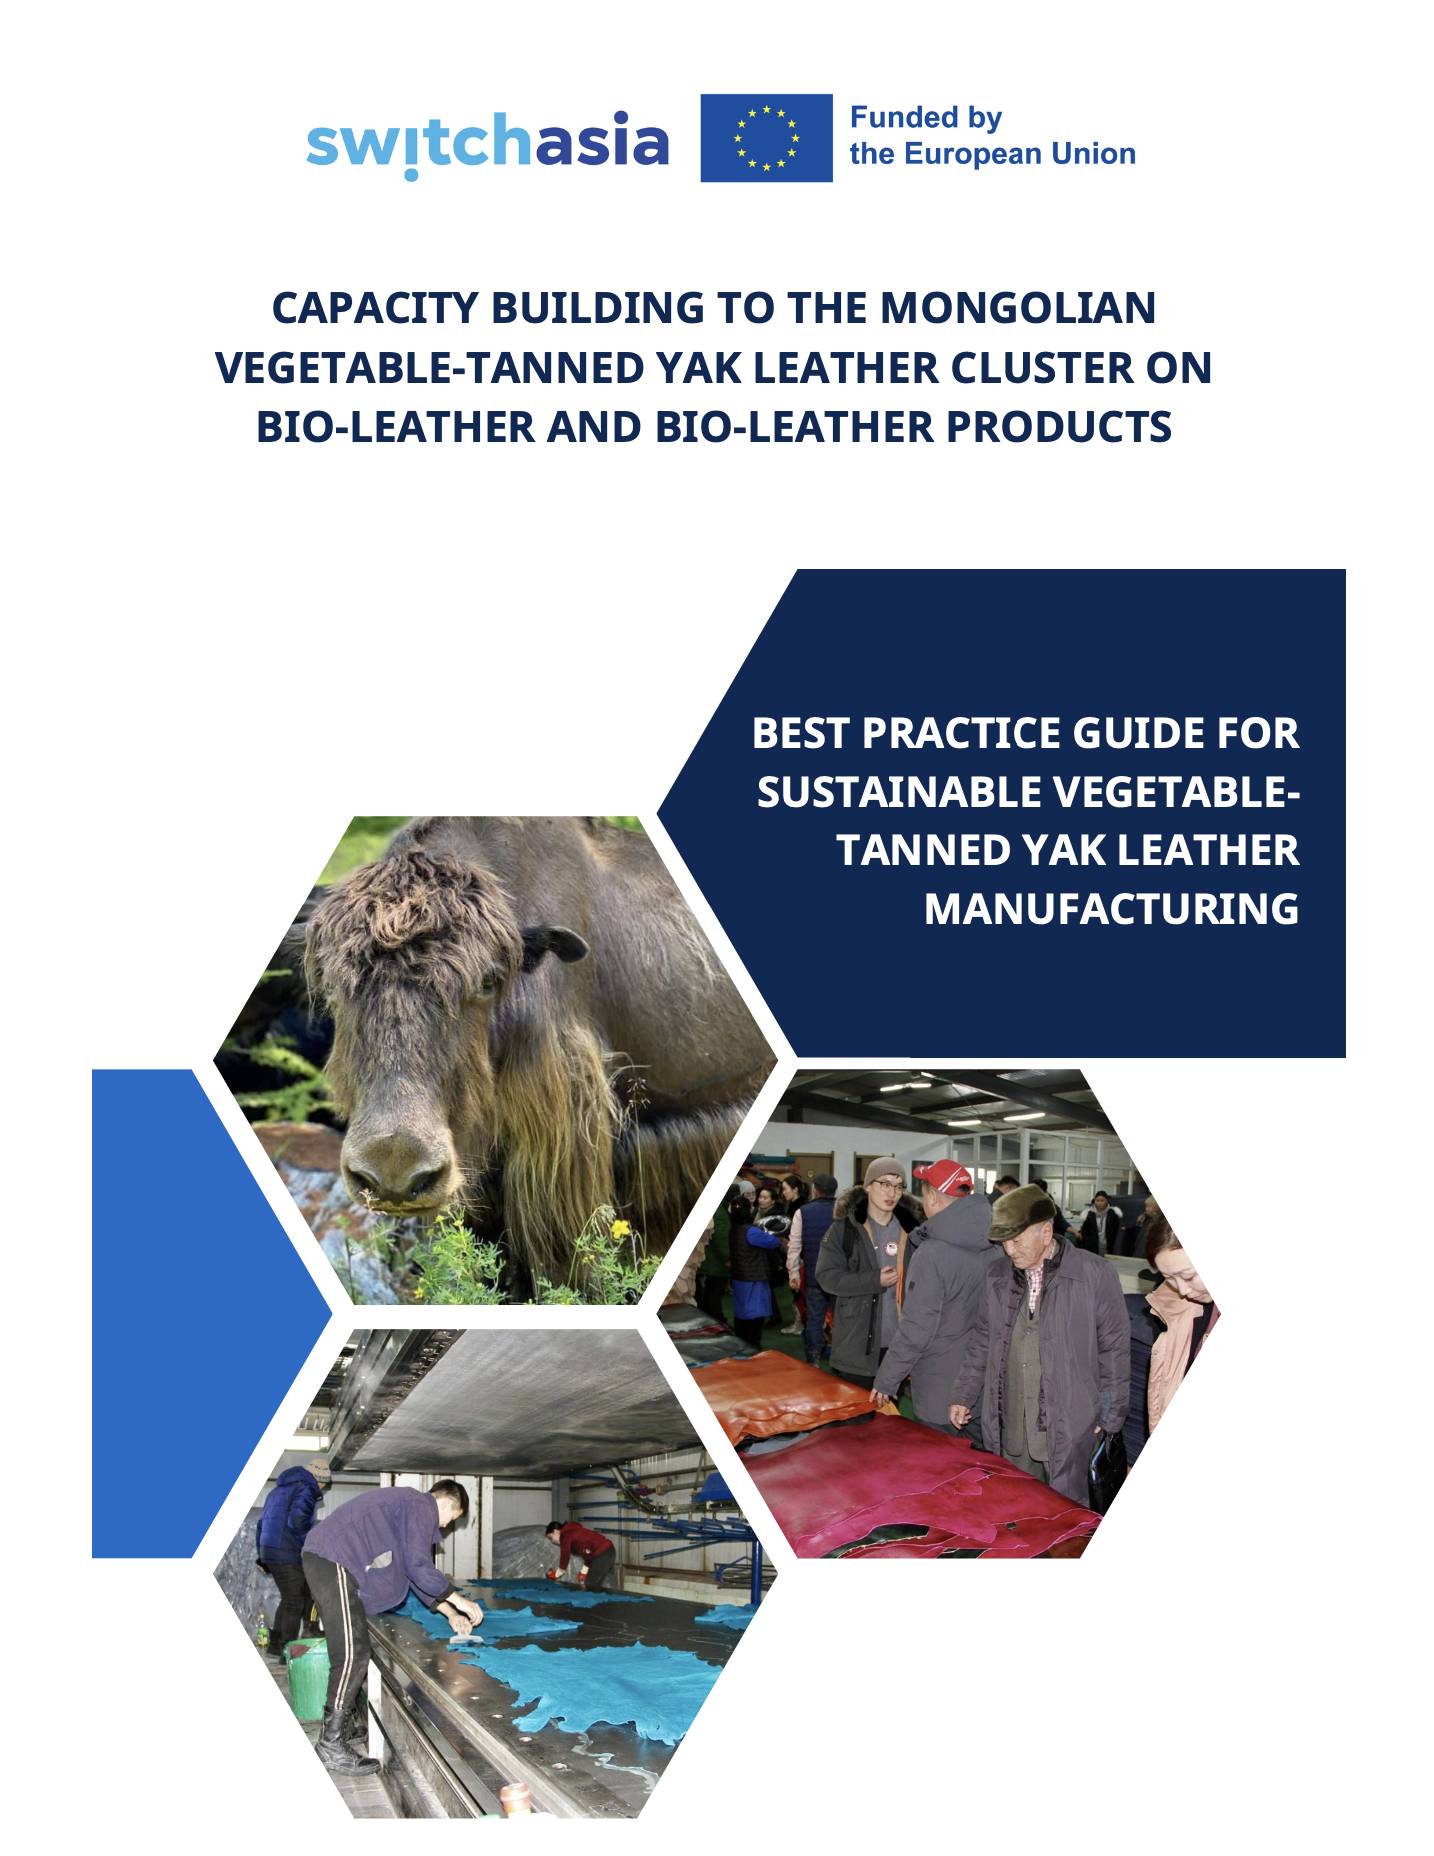 Best Practice Guide for Sustainable Vegetable-Tanned Yak Leather Manufacturing